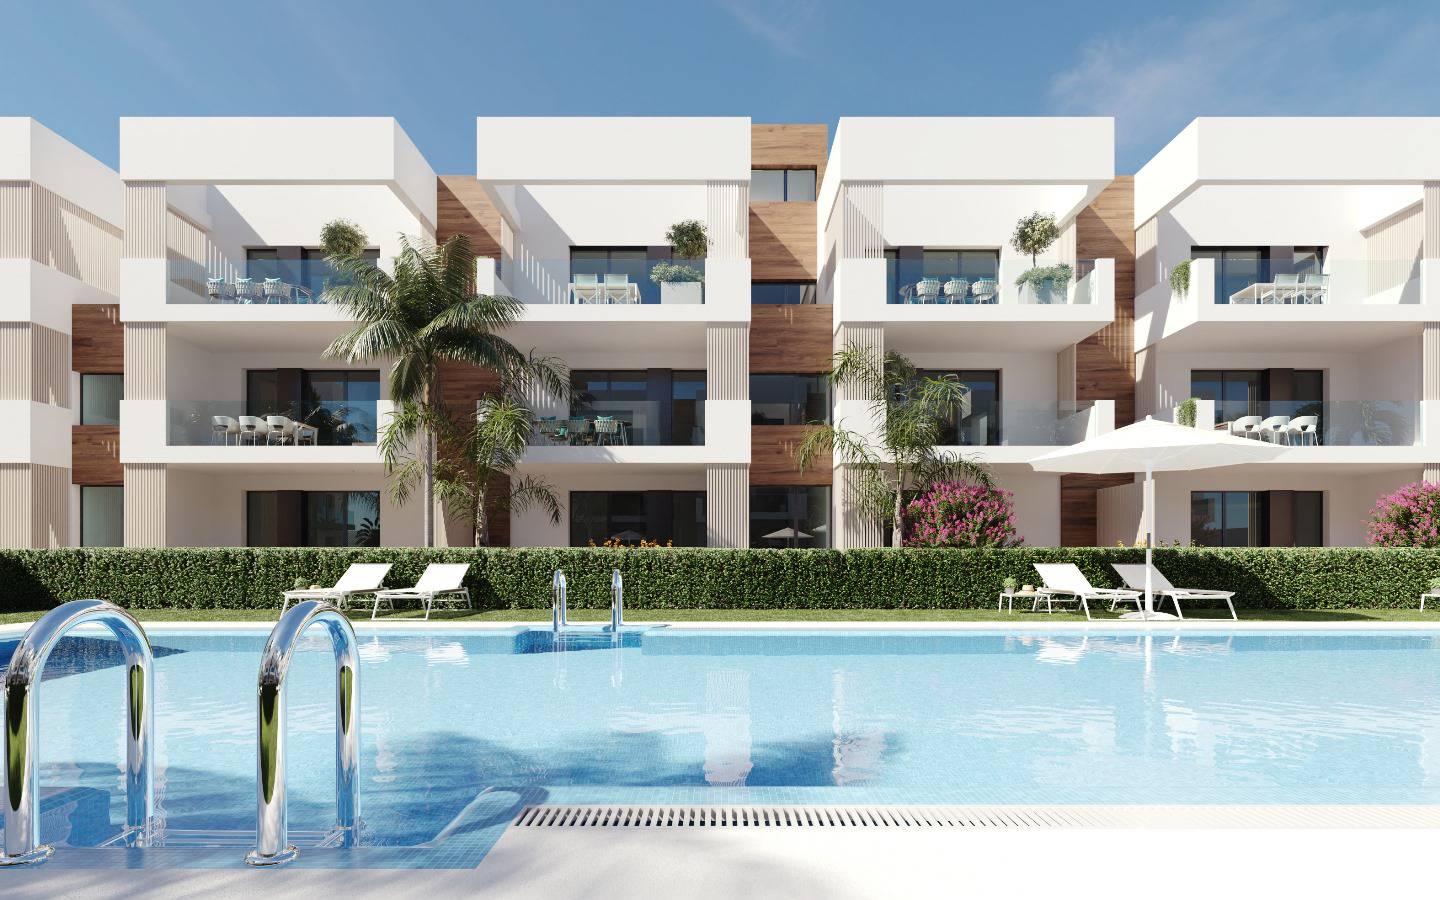 Apartment for sale in San Pedro del Pinatar and San Javier 1